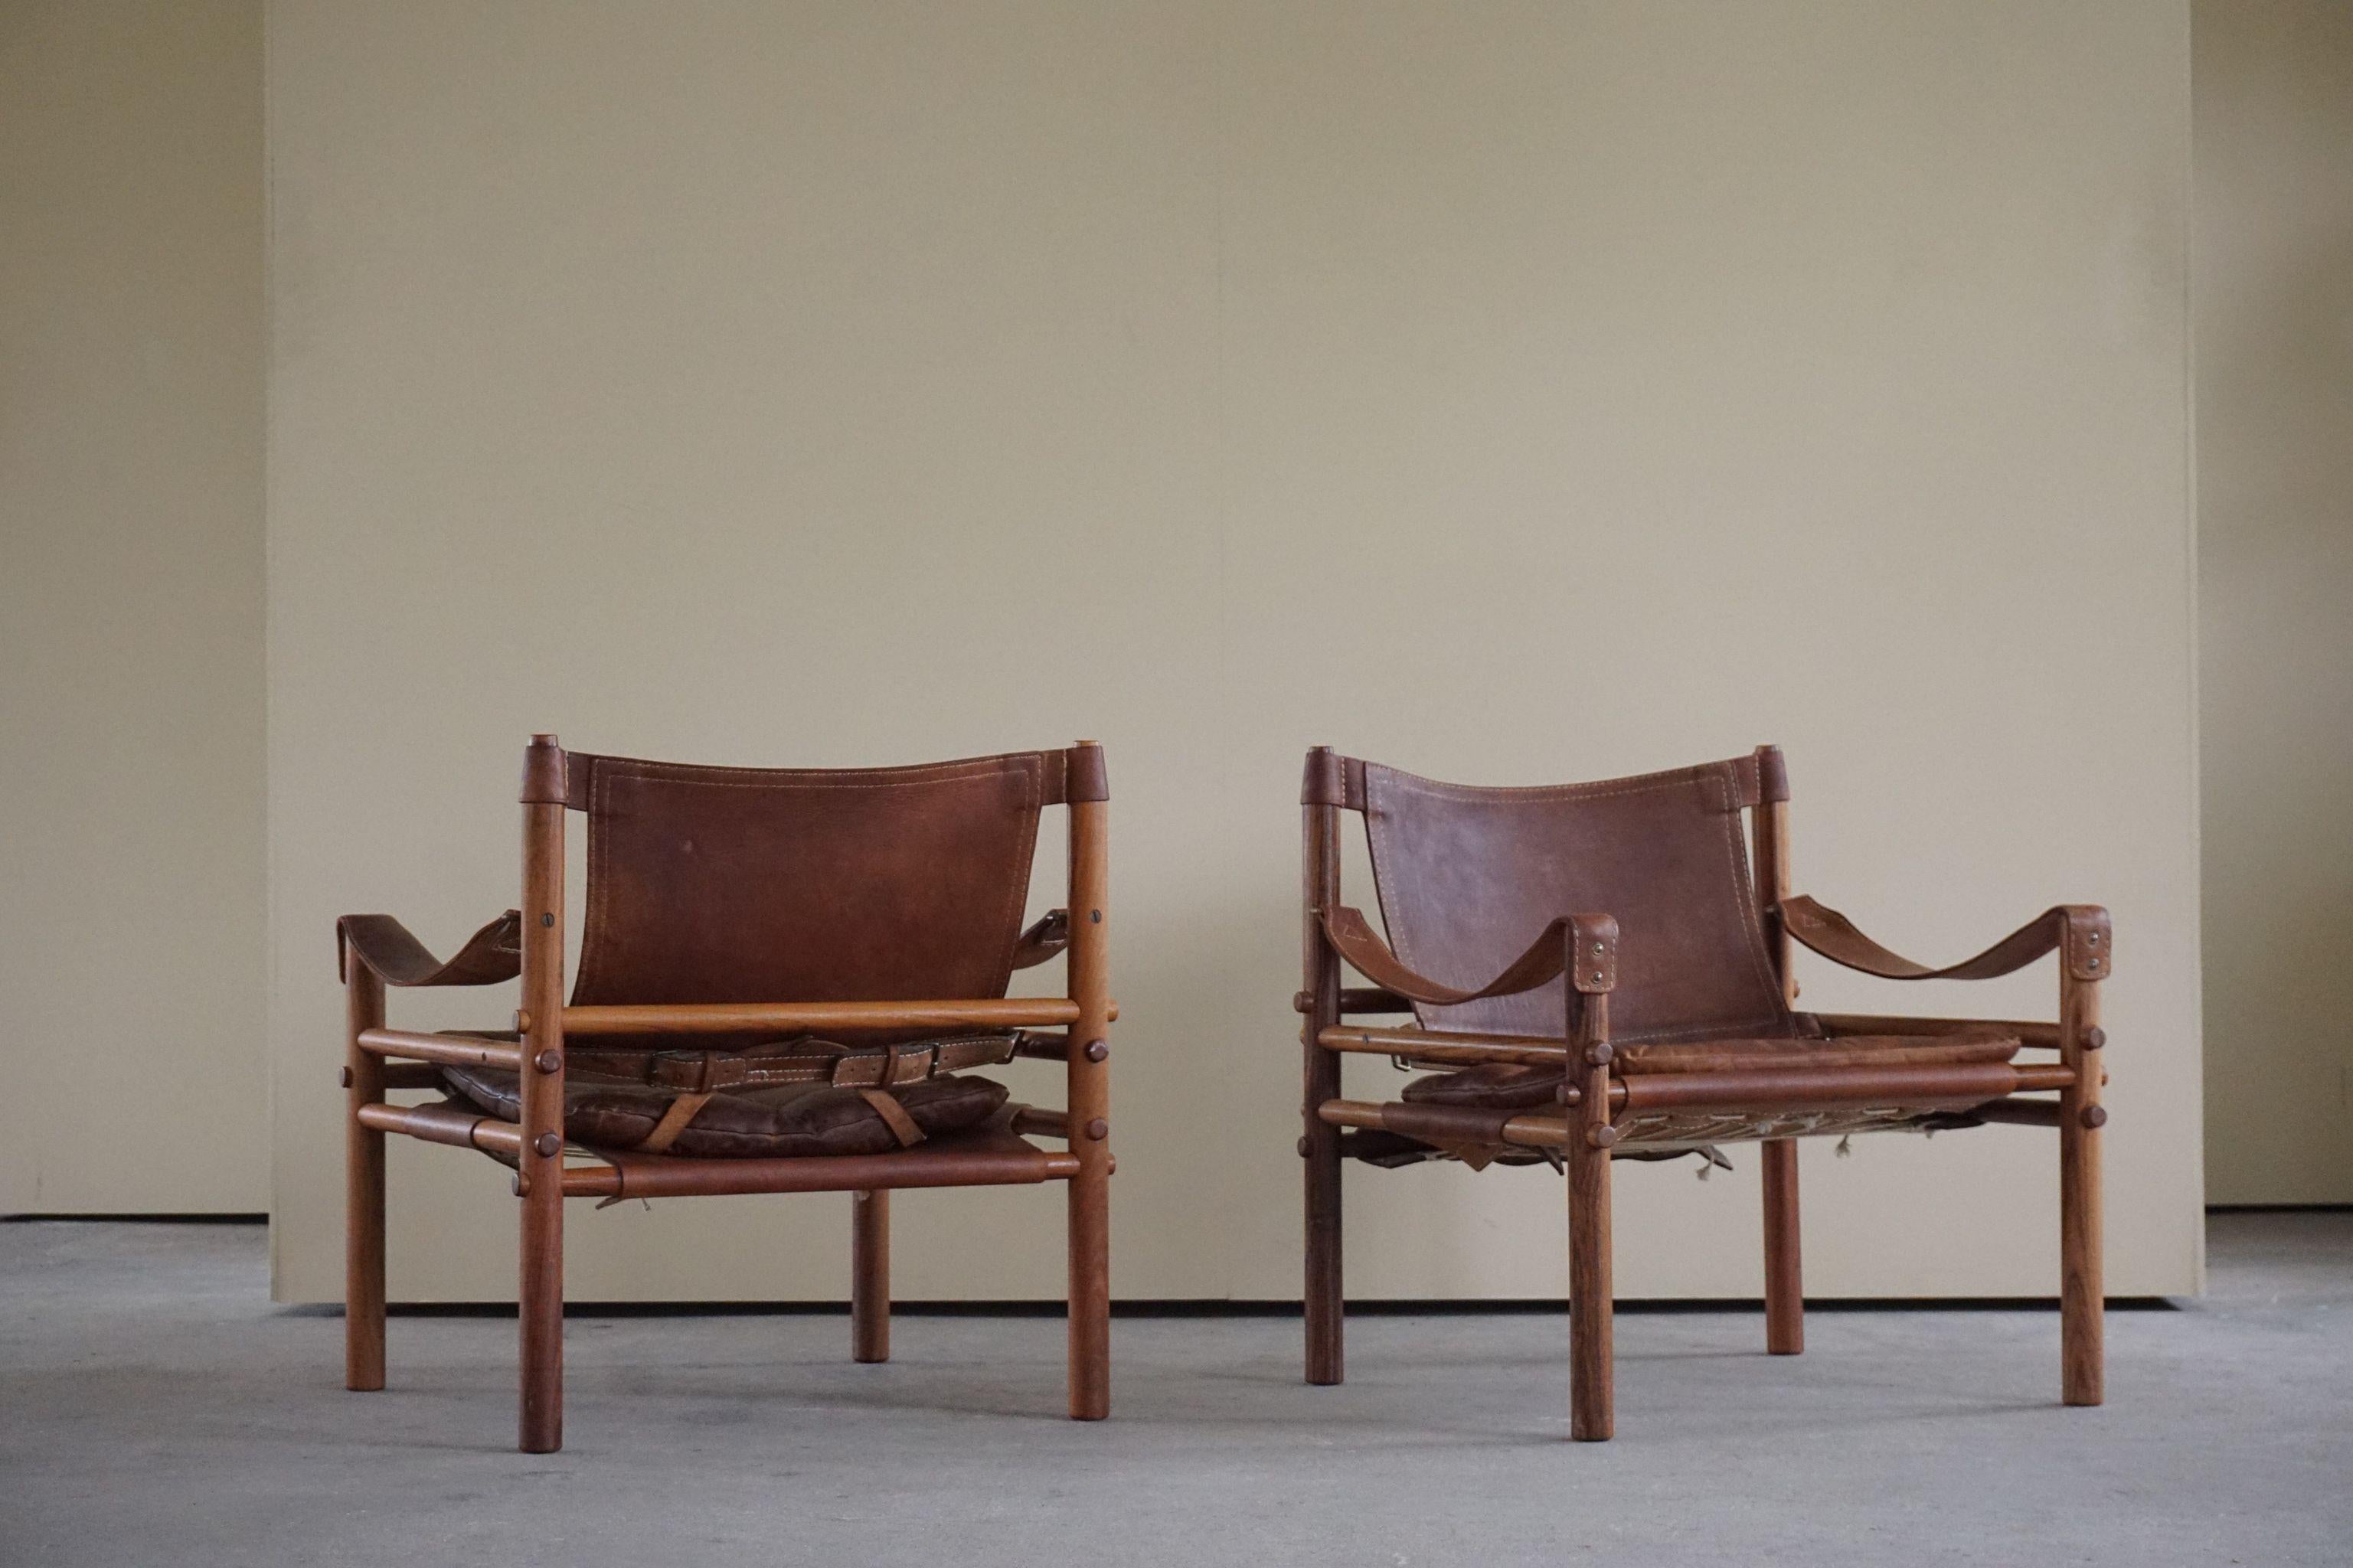 Scandinavian Modern Pair of Sirocco Safari Chairs, Made by Arne Norell AB in Aneby Sweden, 1960s